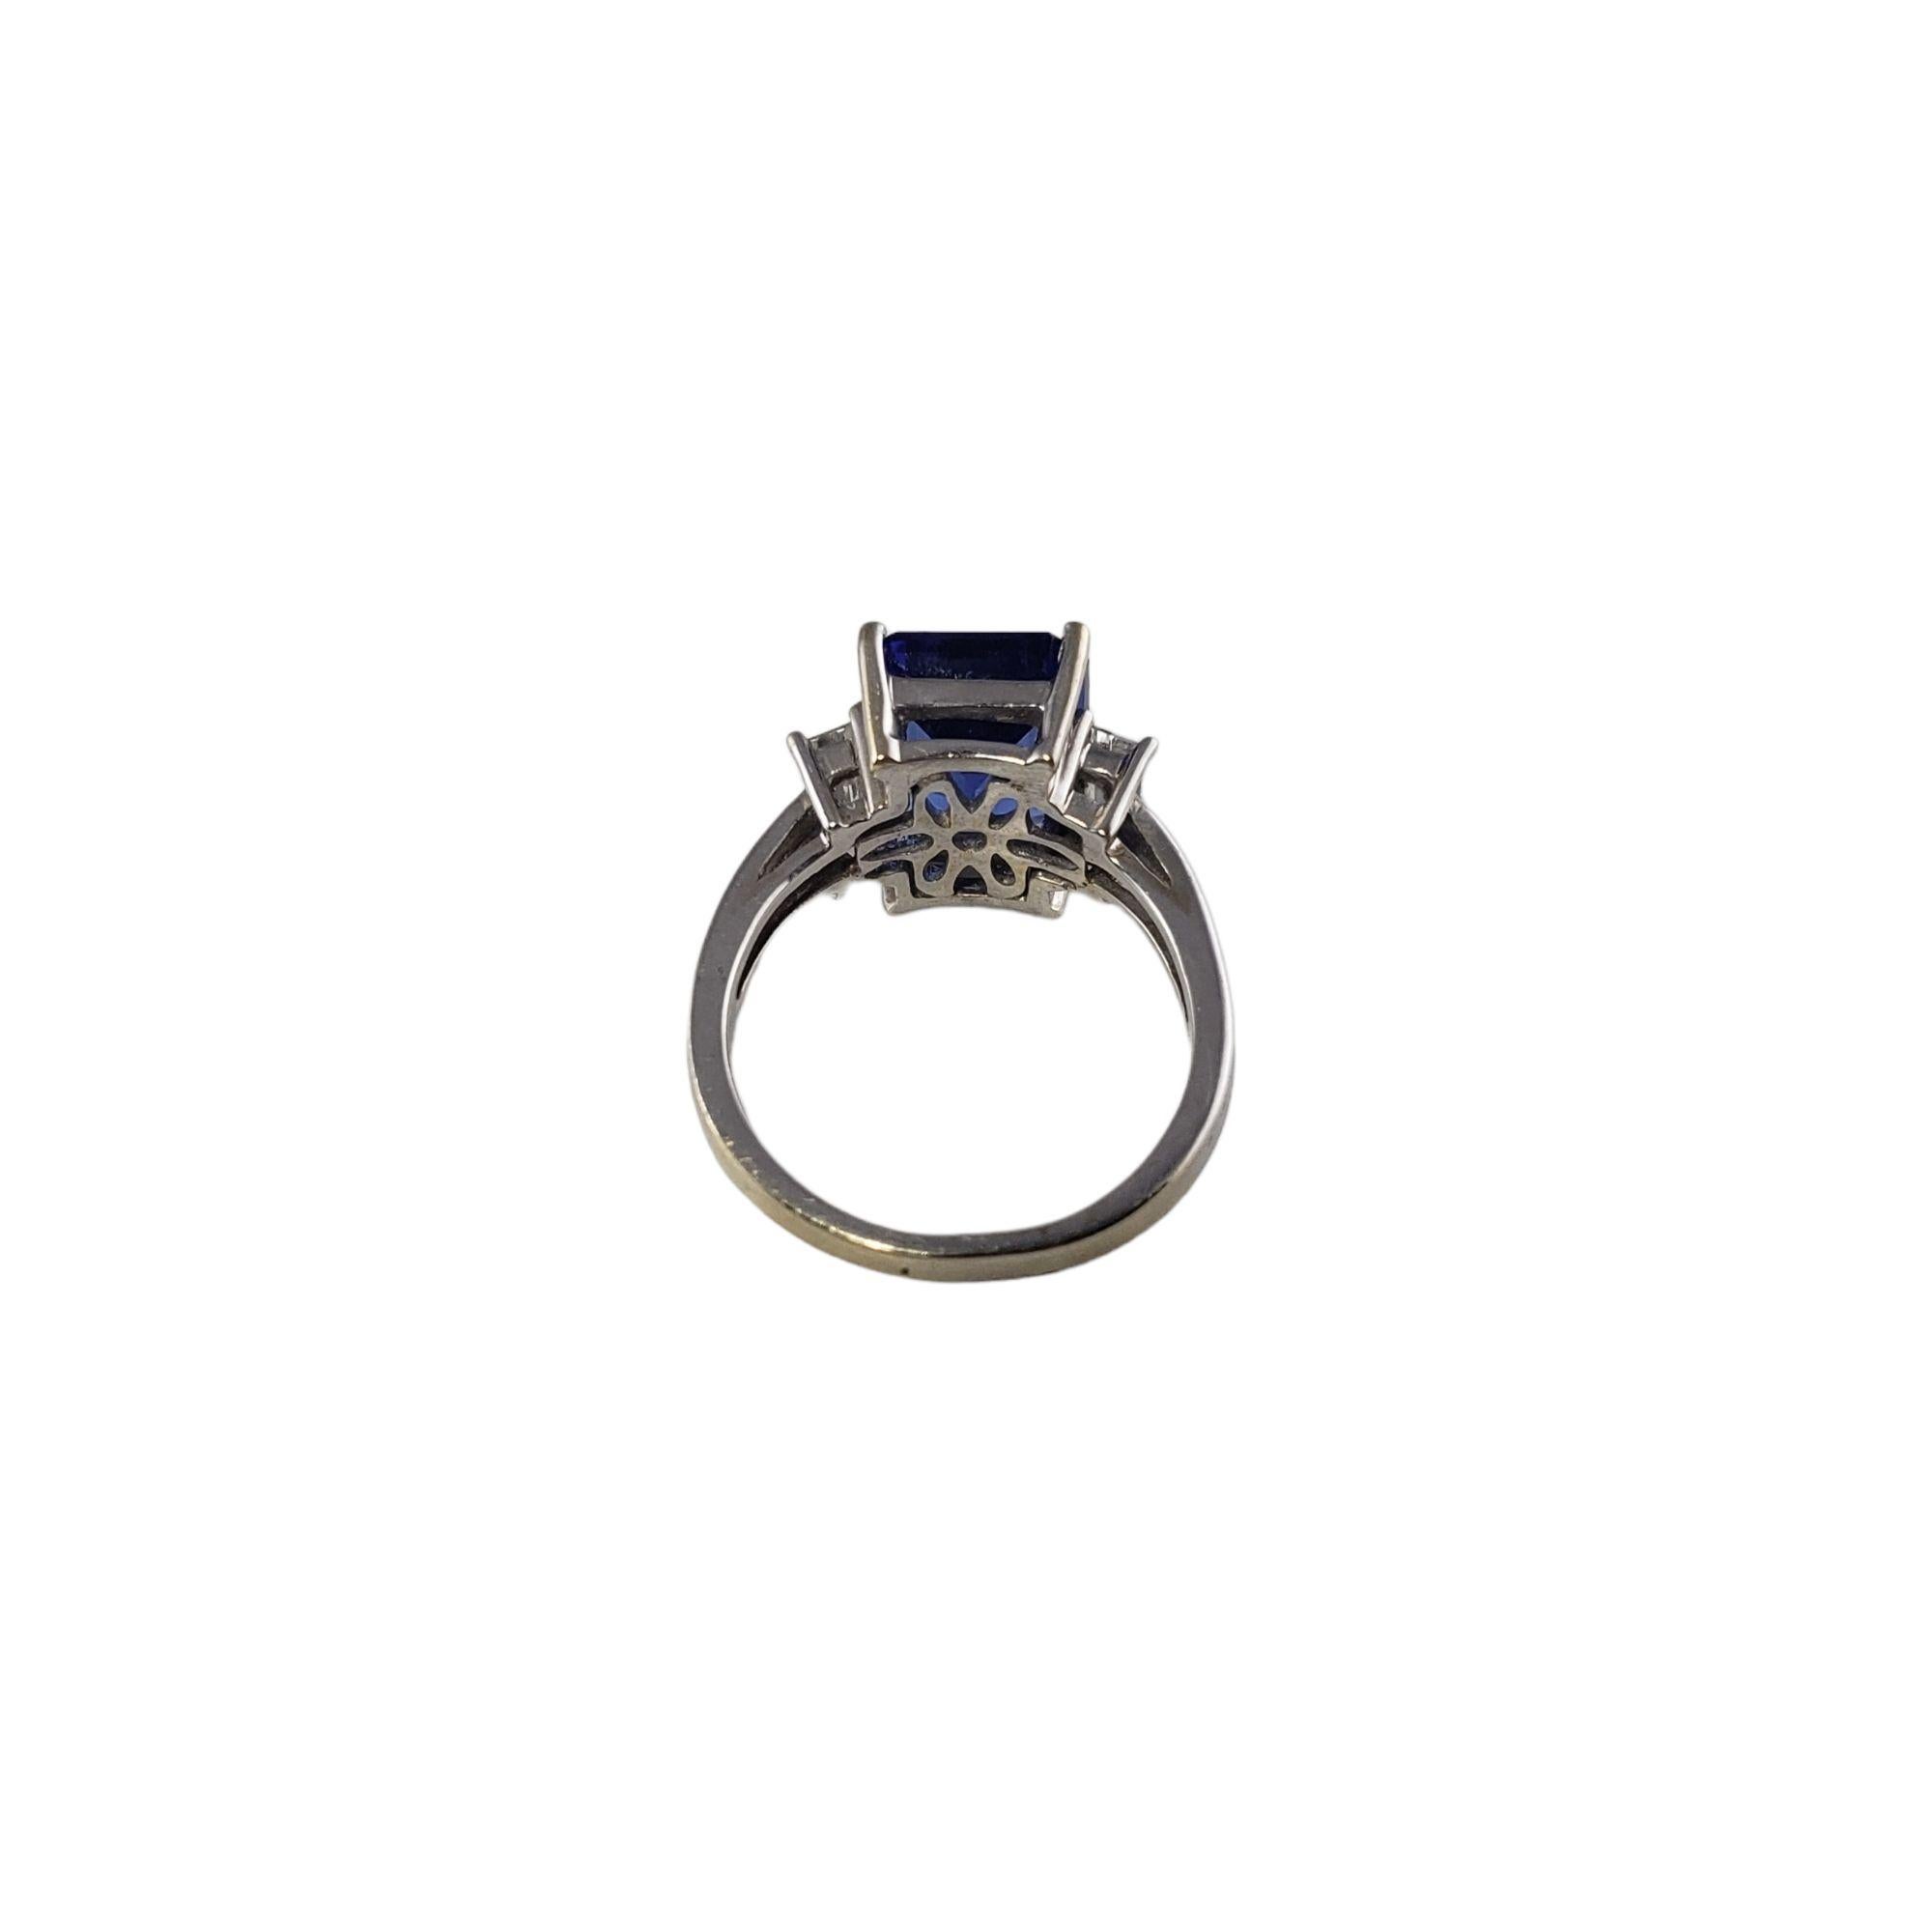 Vintage 18 Karat White Gold Tanzanite and Diamond Ring Size 5.75 JAGi Certified-

This stunning ring features one emerald cut tanzanite (12 mm x 10 mm) and two baguette cut diamonds set in classic 18K white gold. Shank: 2 mm.

Tanzanite weight: 6.92